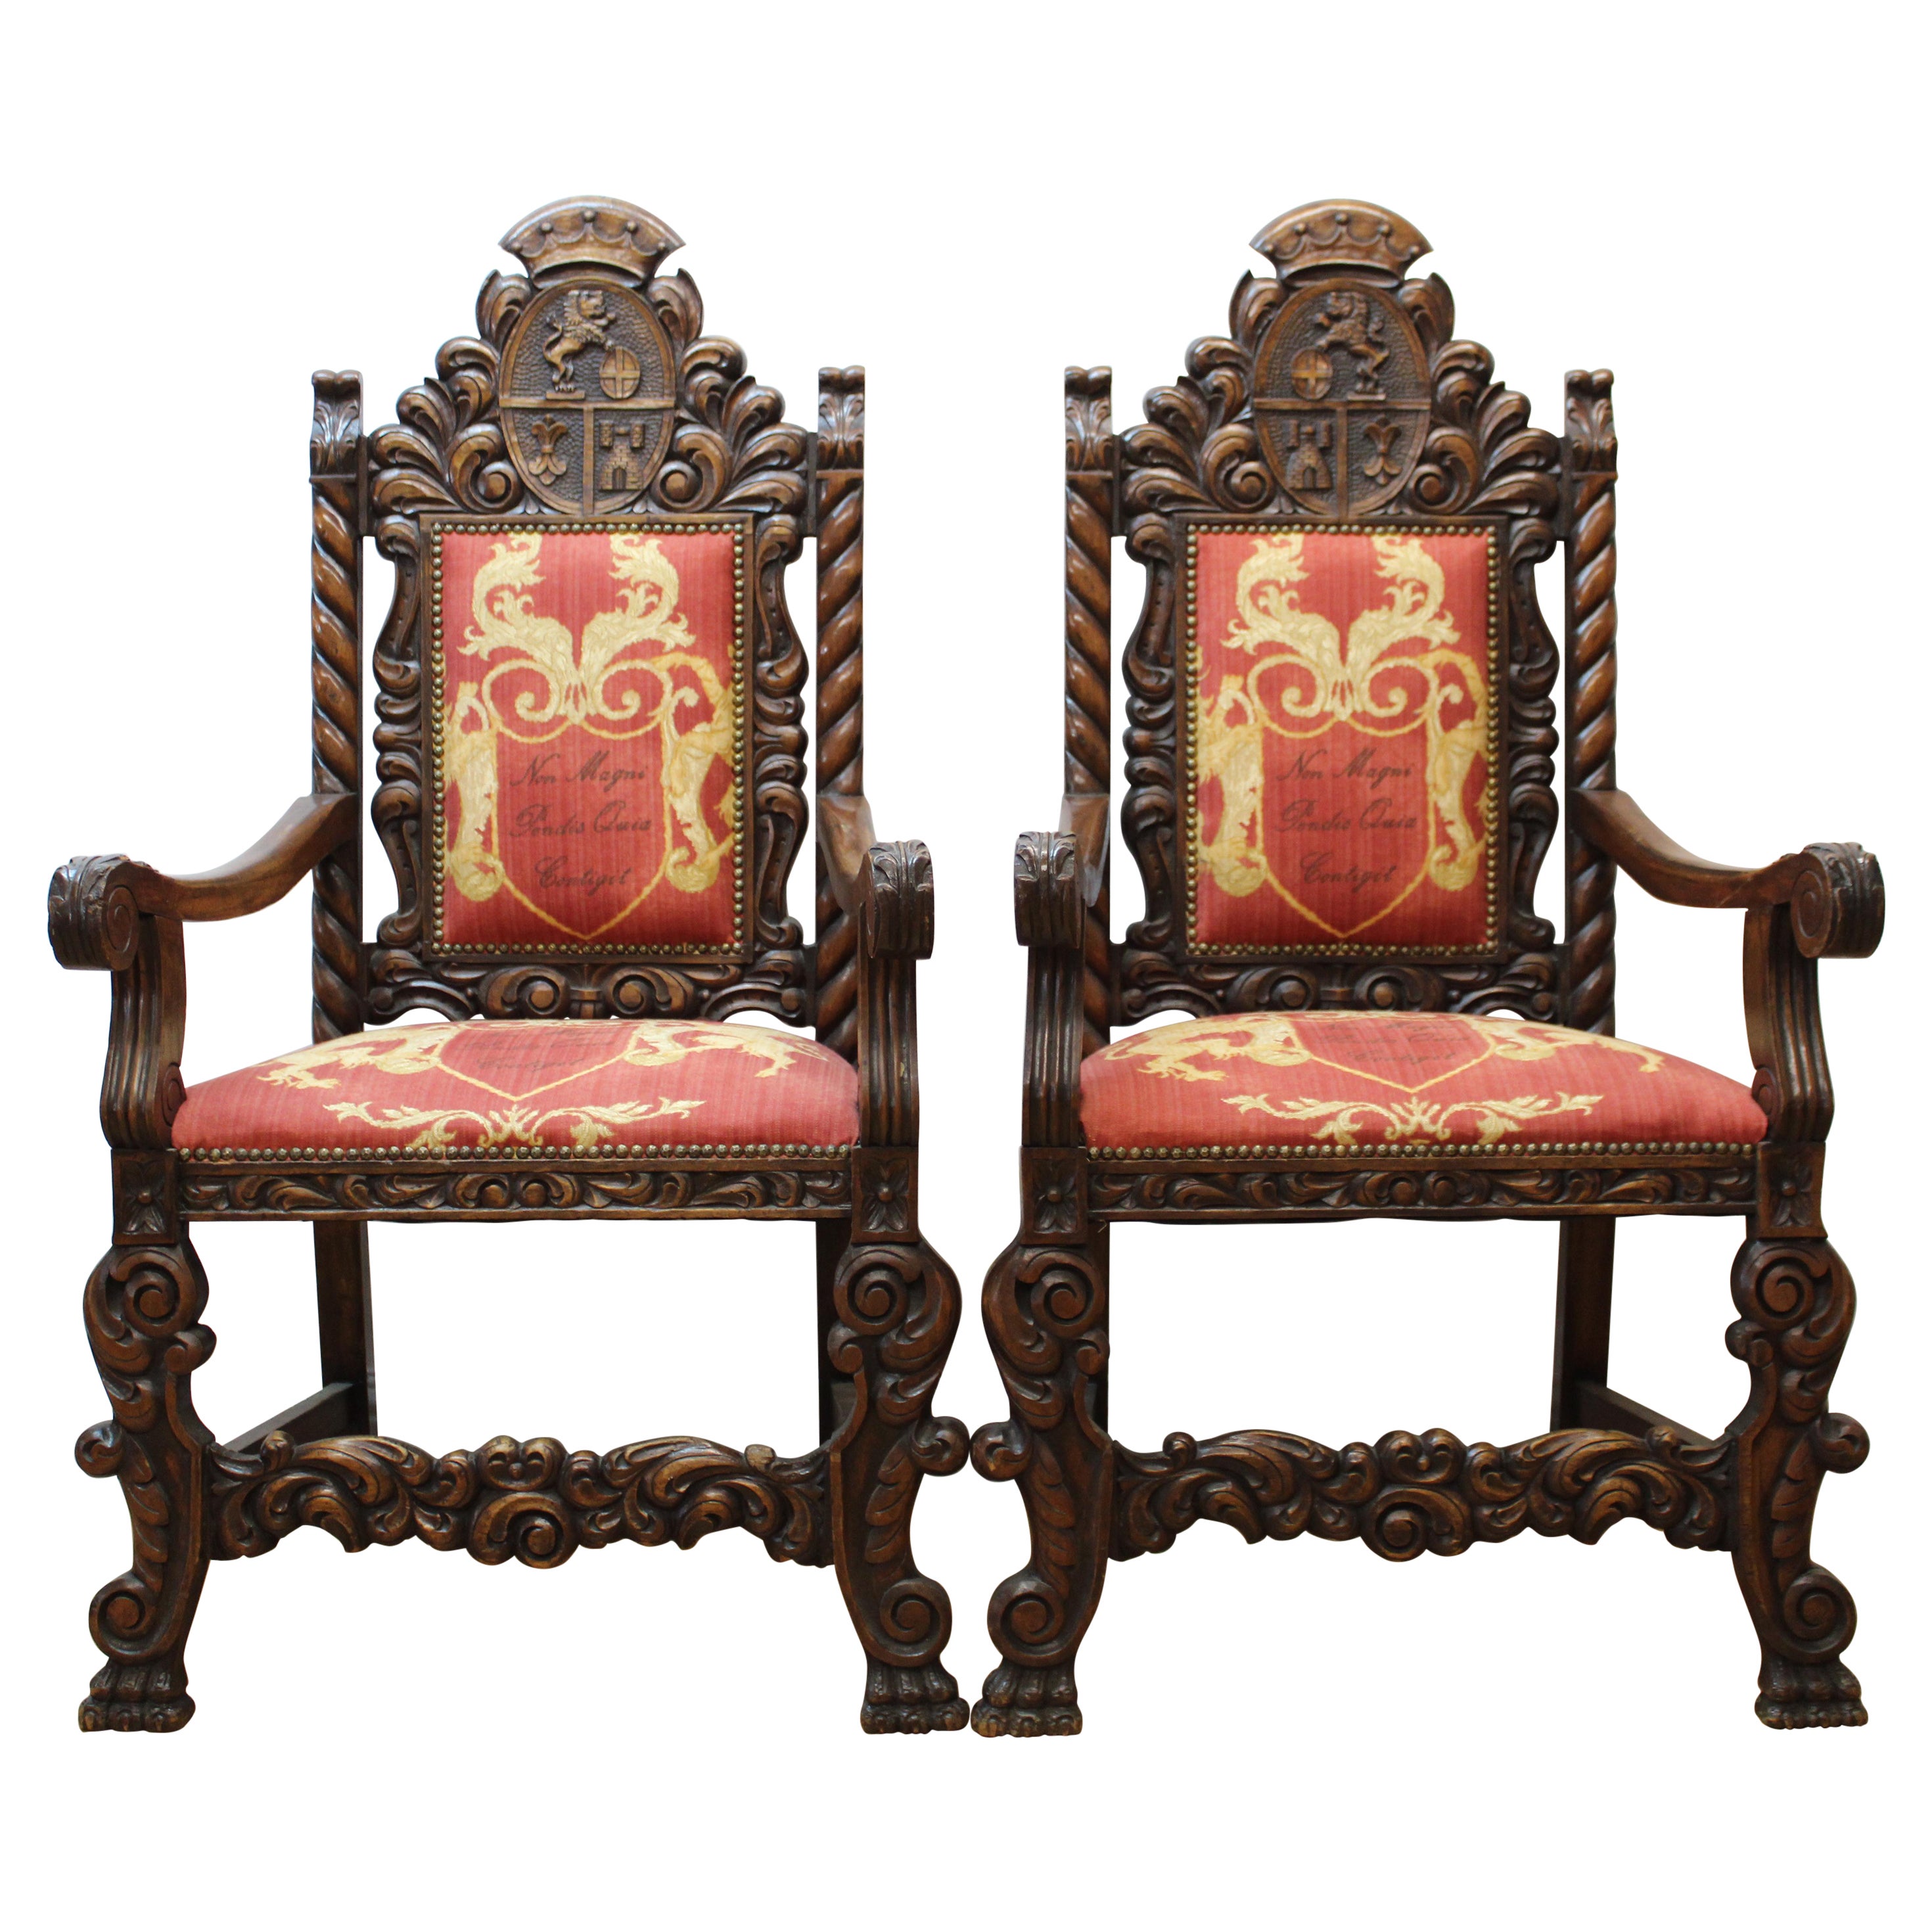 Spanish Colonial Beautiful Arm Chairs w/ Crests